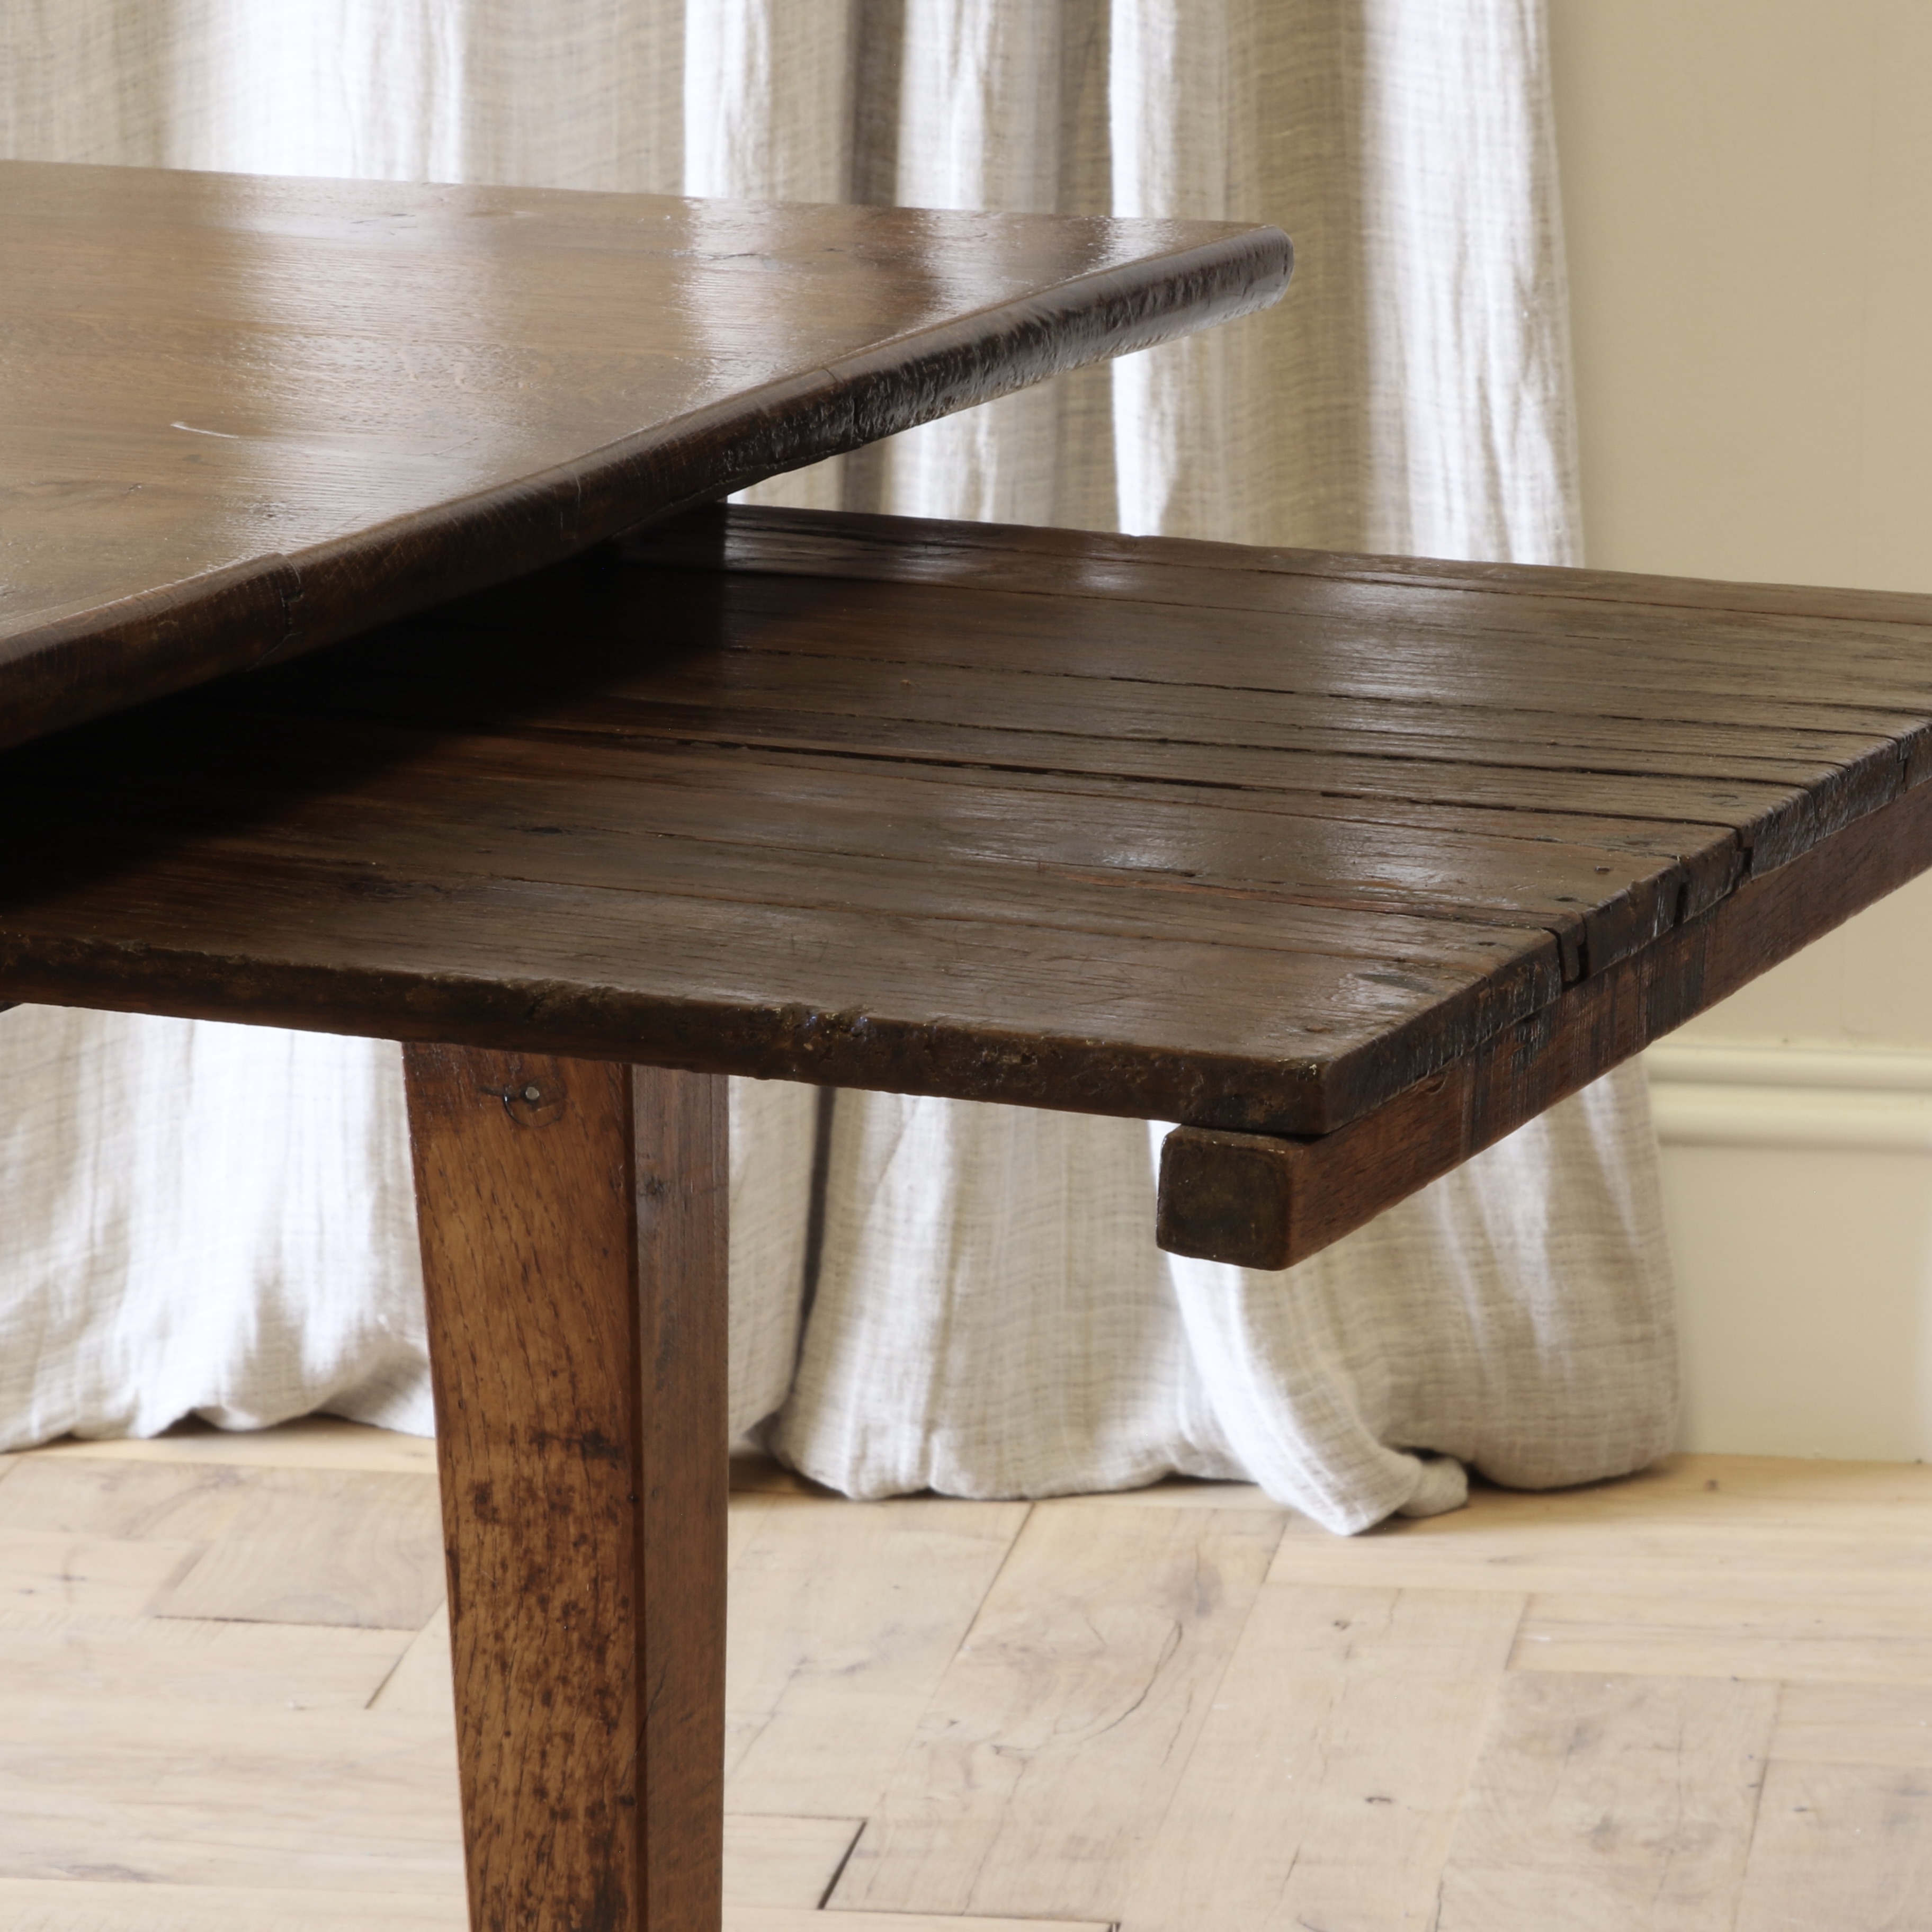 French ProvIncial Dining Table / Length 2020mm